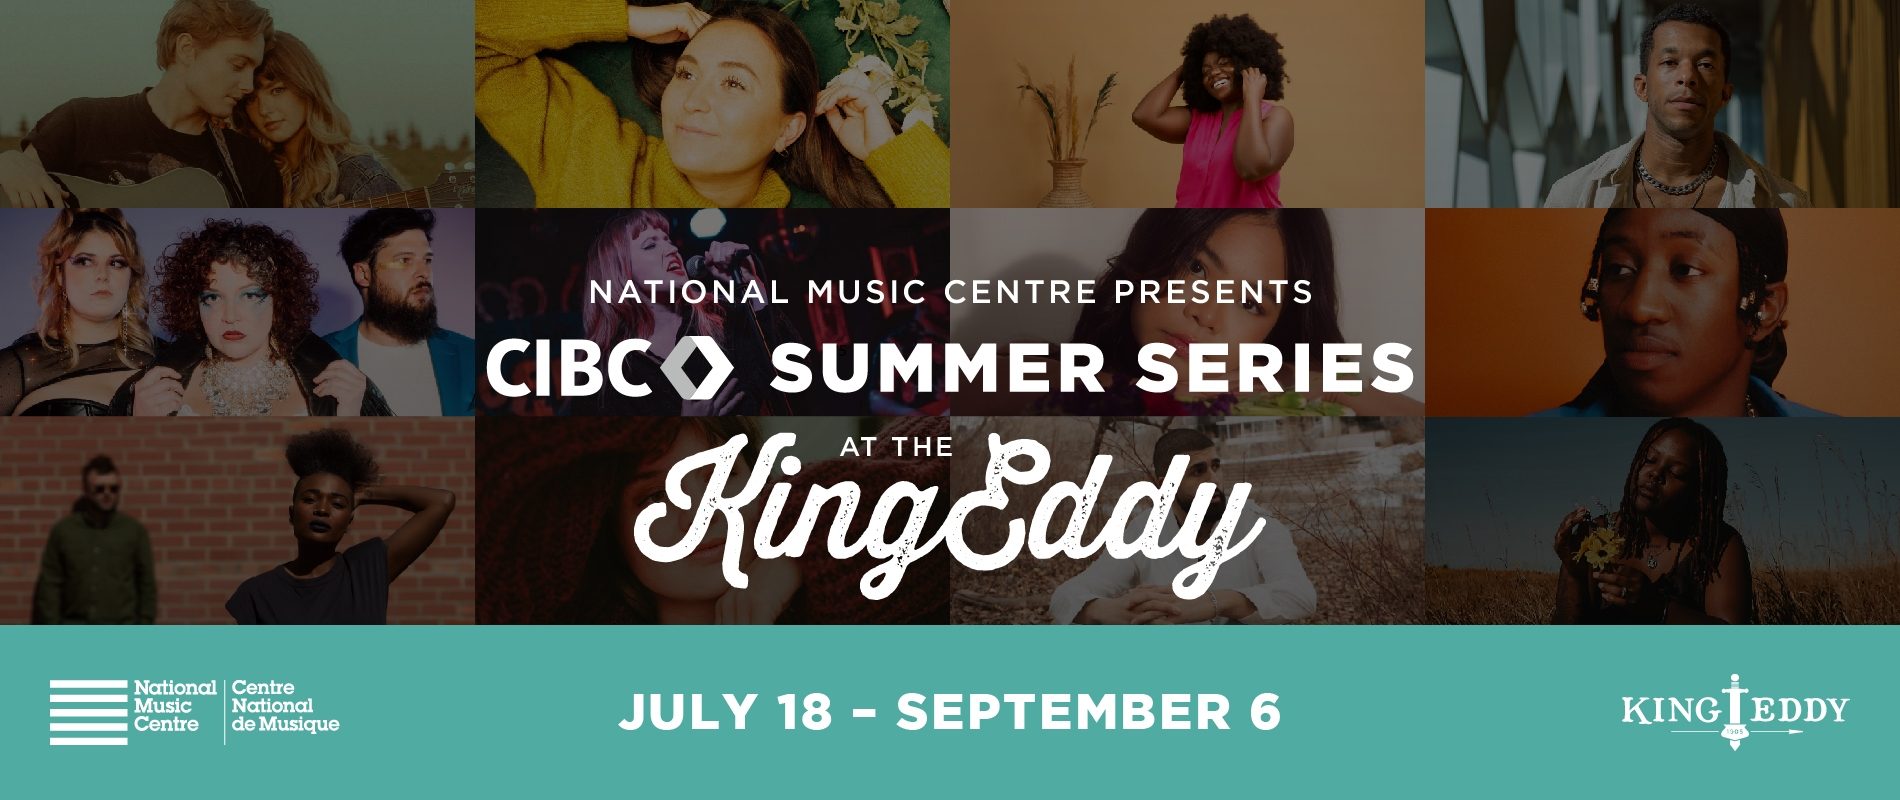 National Music Centre Announces CIBC Summer Series at the King Eddy, from July 18-September 6